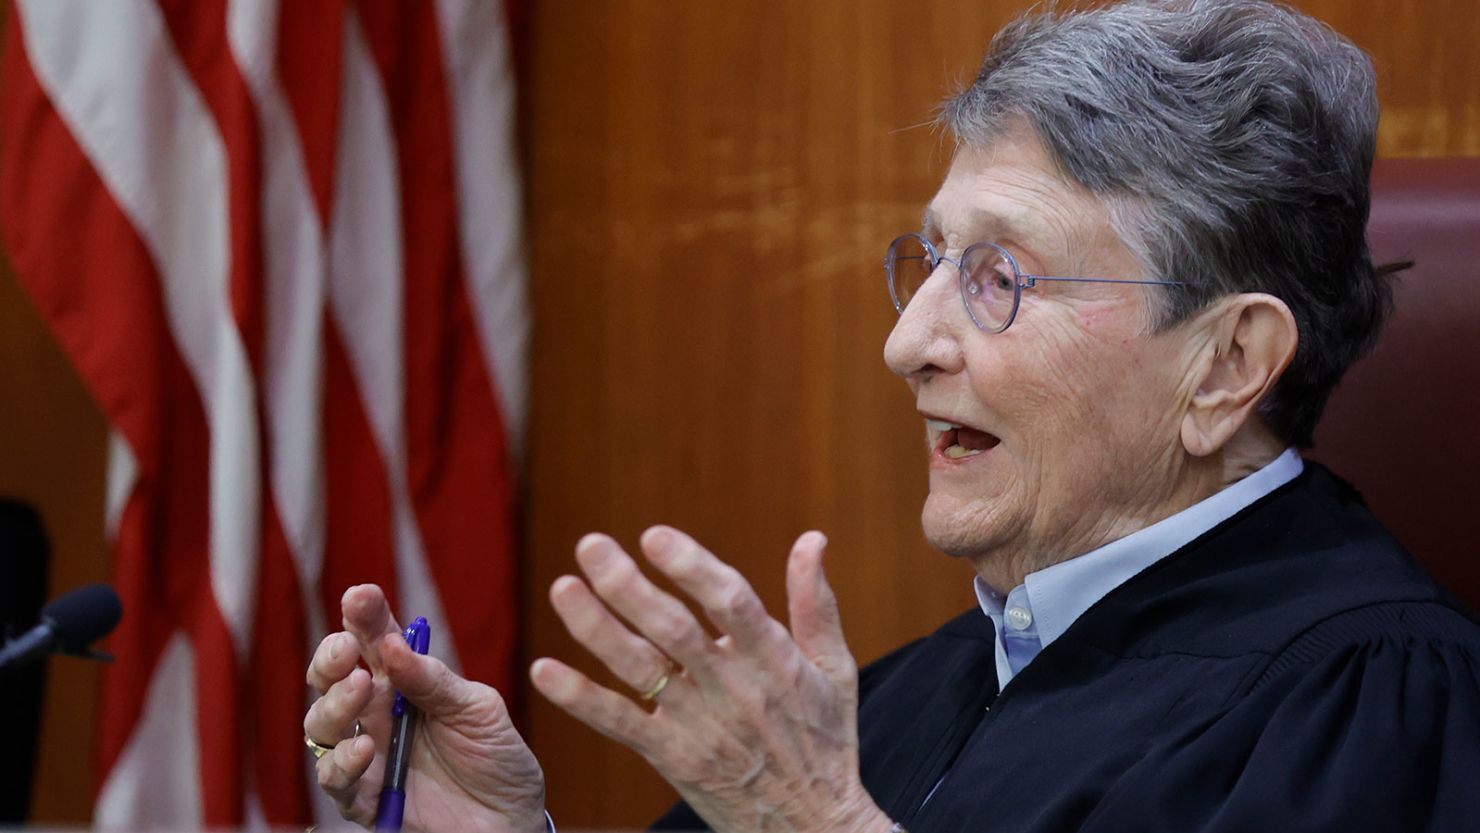 Judge Jean Toal, former South Carolina Supreme Court Justice, presides during a hearing on a motion for Alex Murdaugh's retrial on January 16.